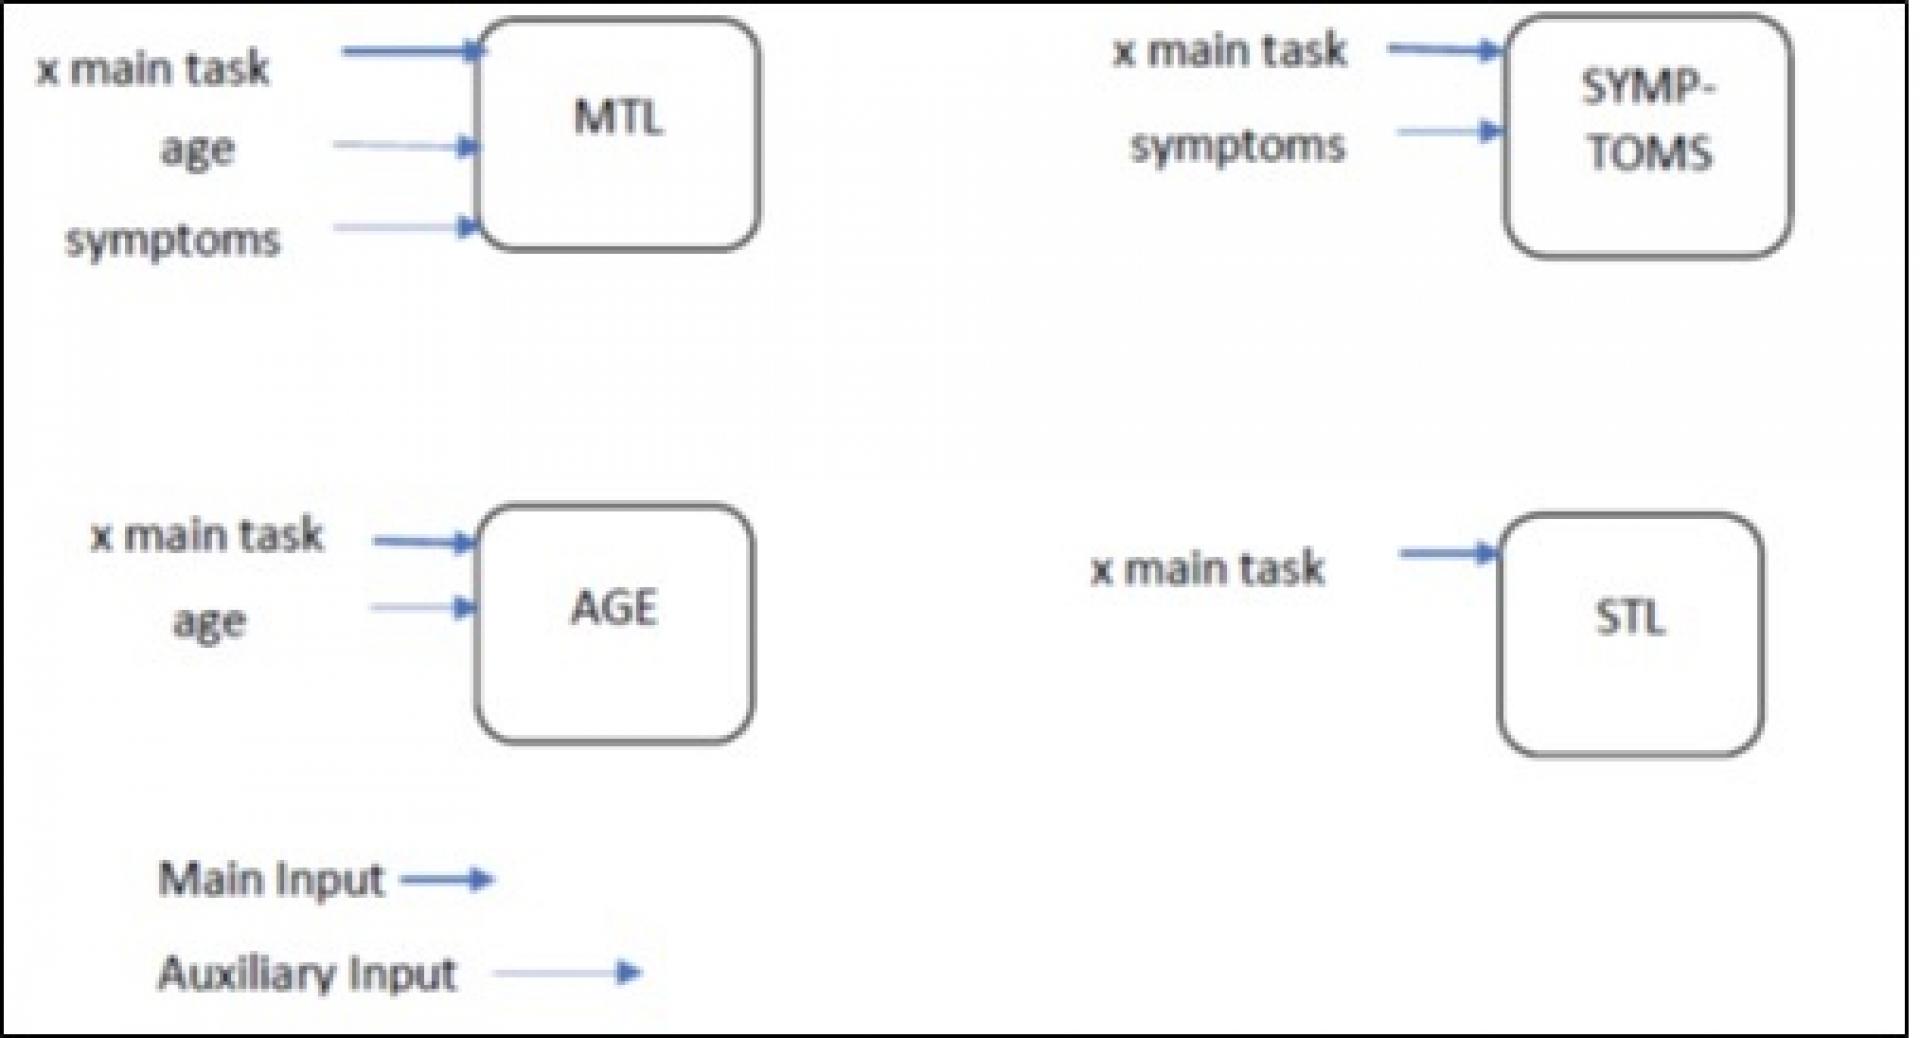 AIR models architecture (both Single Task Learning and Multi-Task Learning)